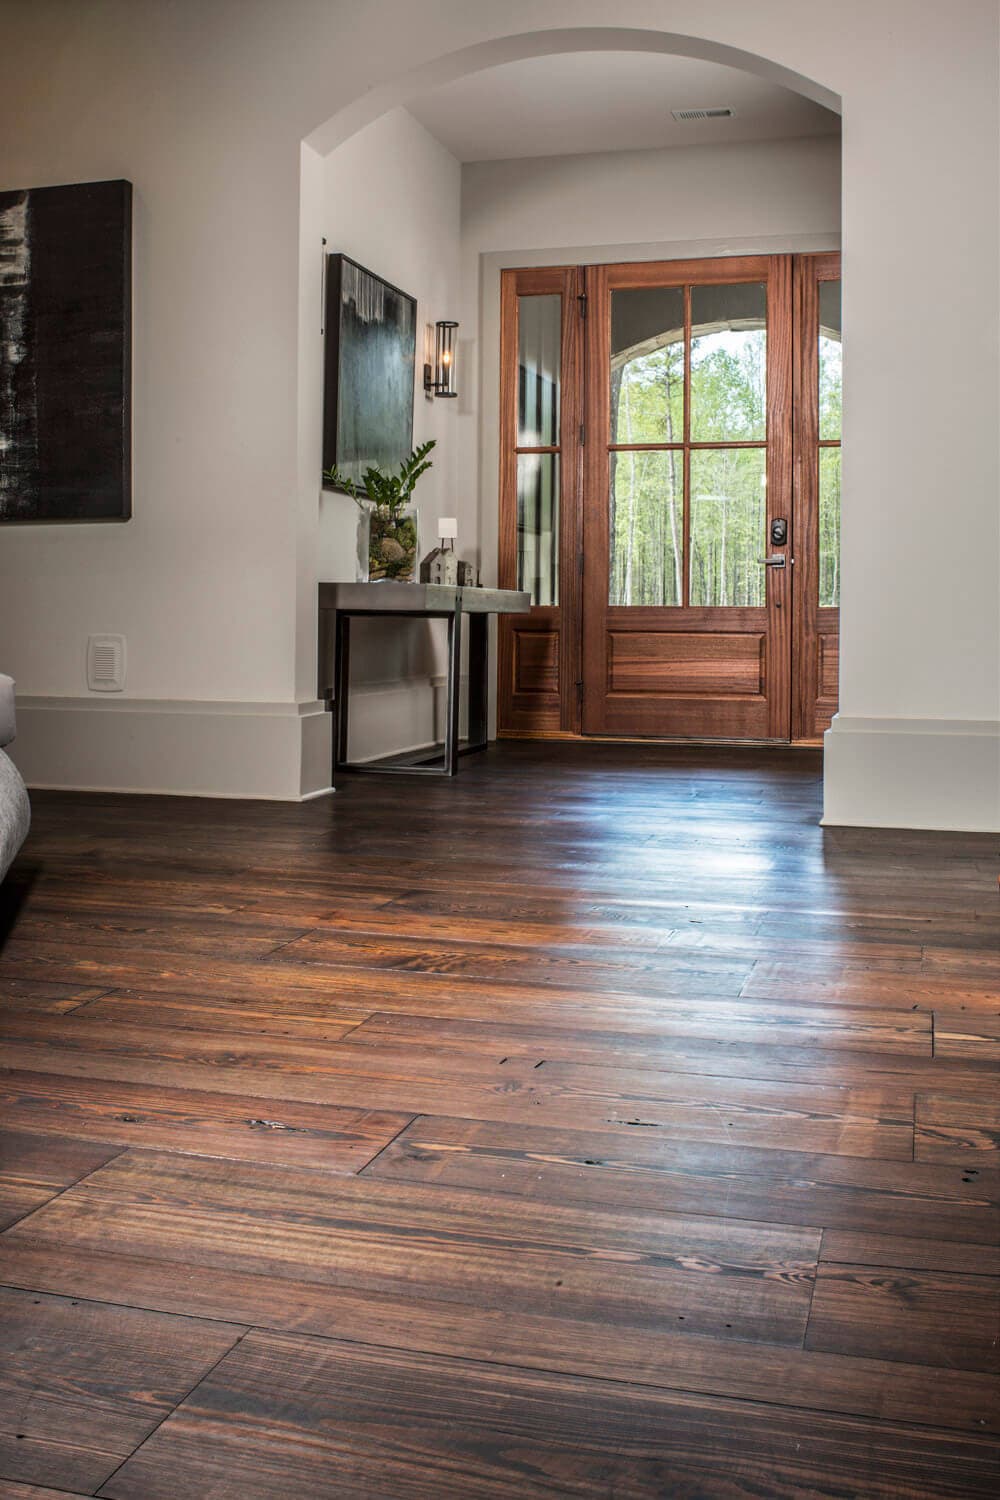 plain sawn heart pine floor with a view to the front door